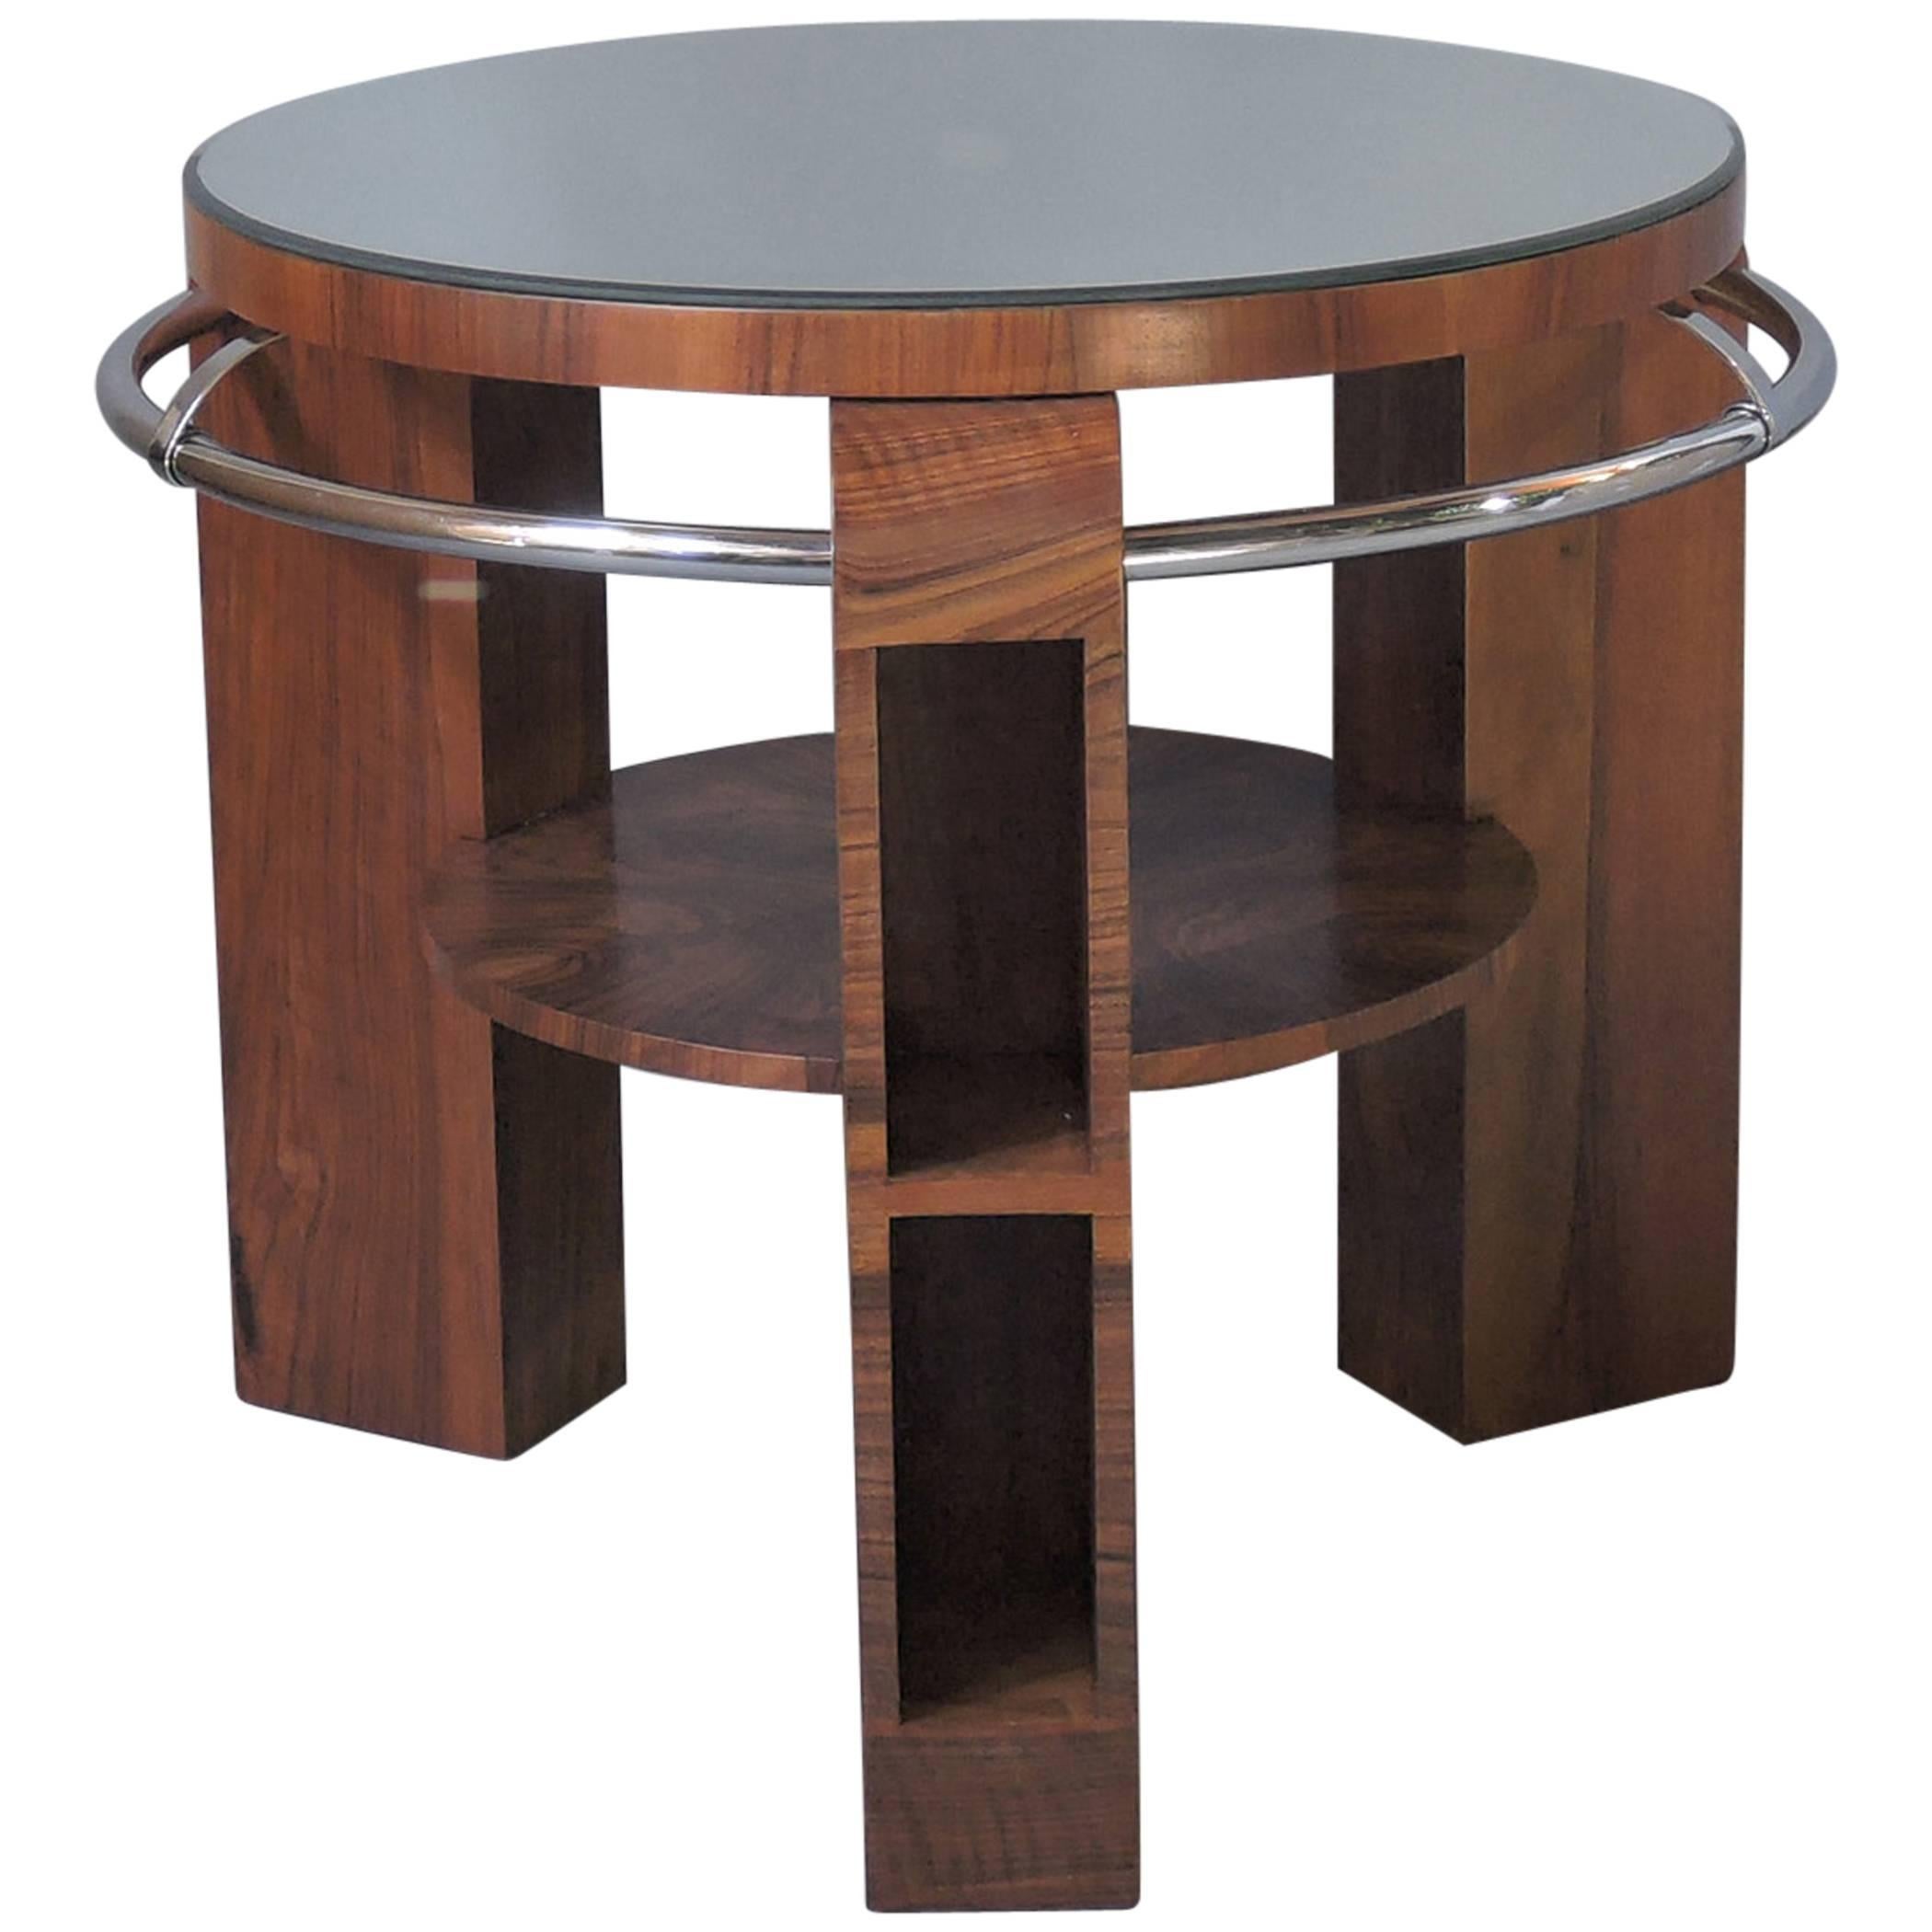 A Fine French Art Deco Walnut and Chrome Two-Tiered Gueridon For Sale